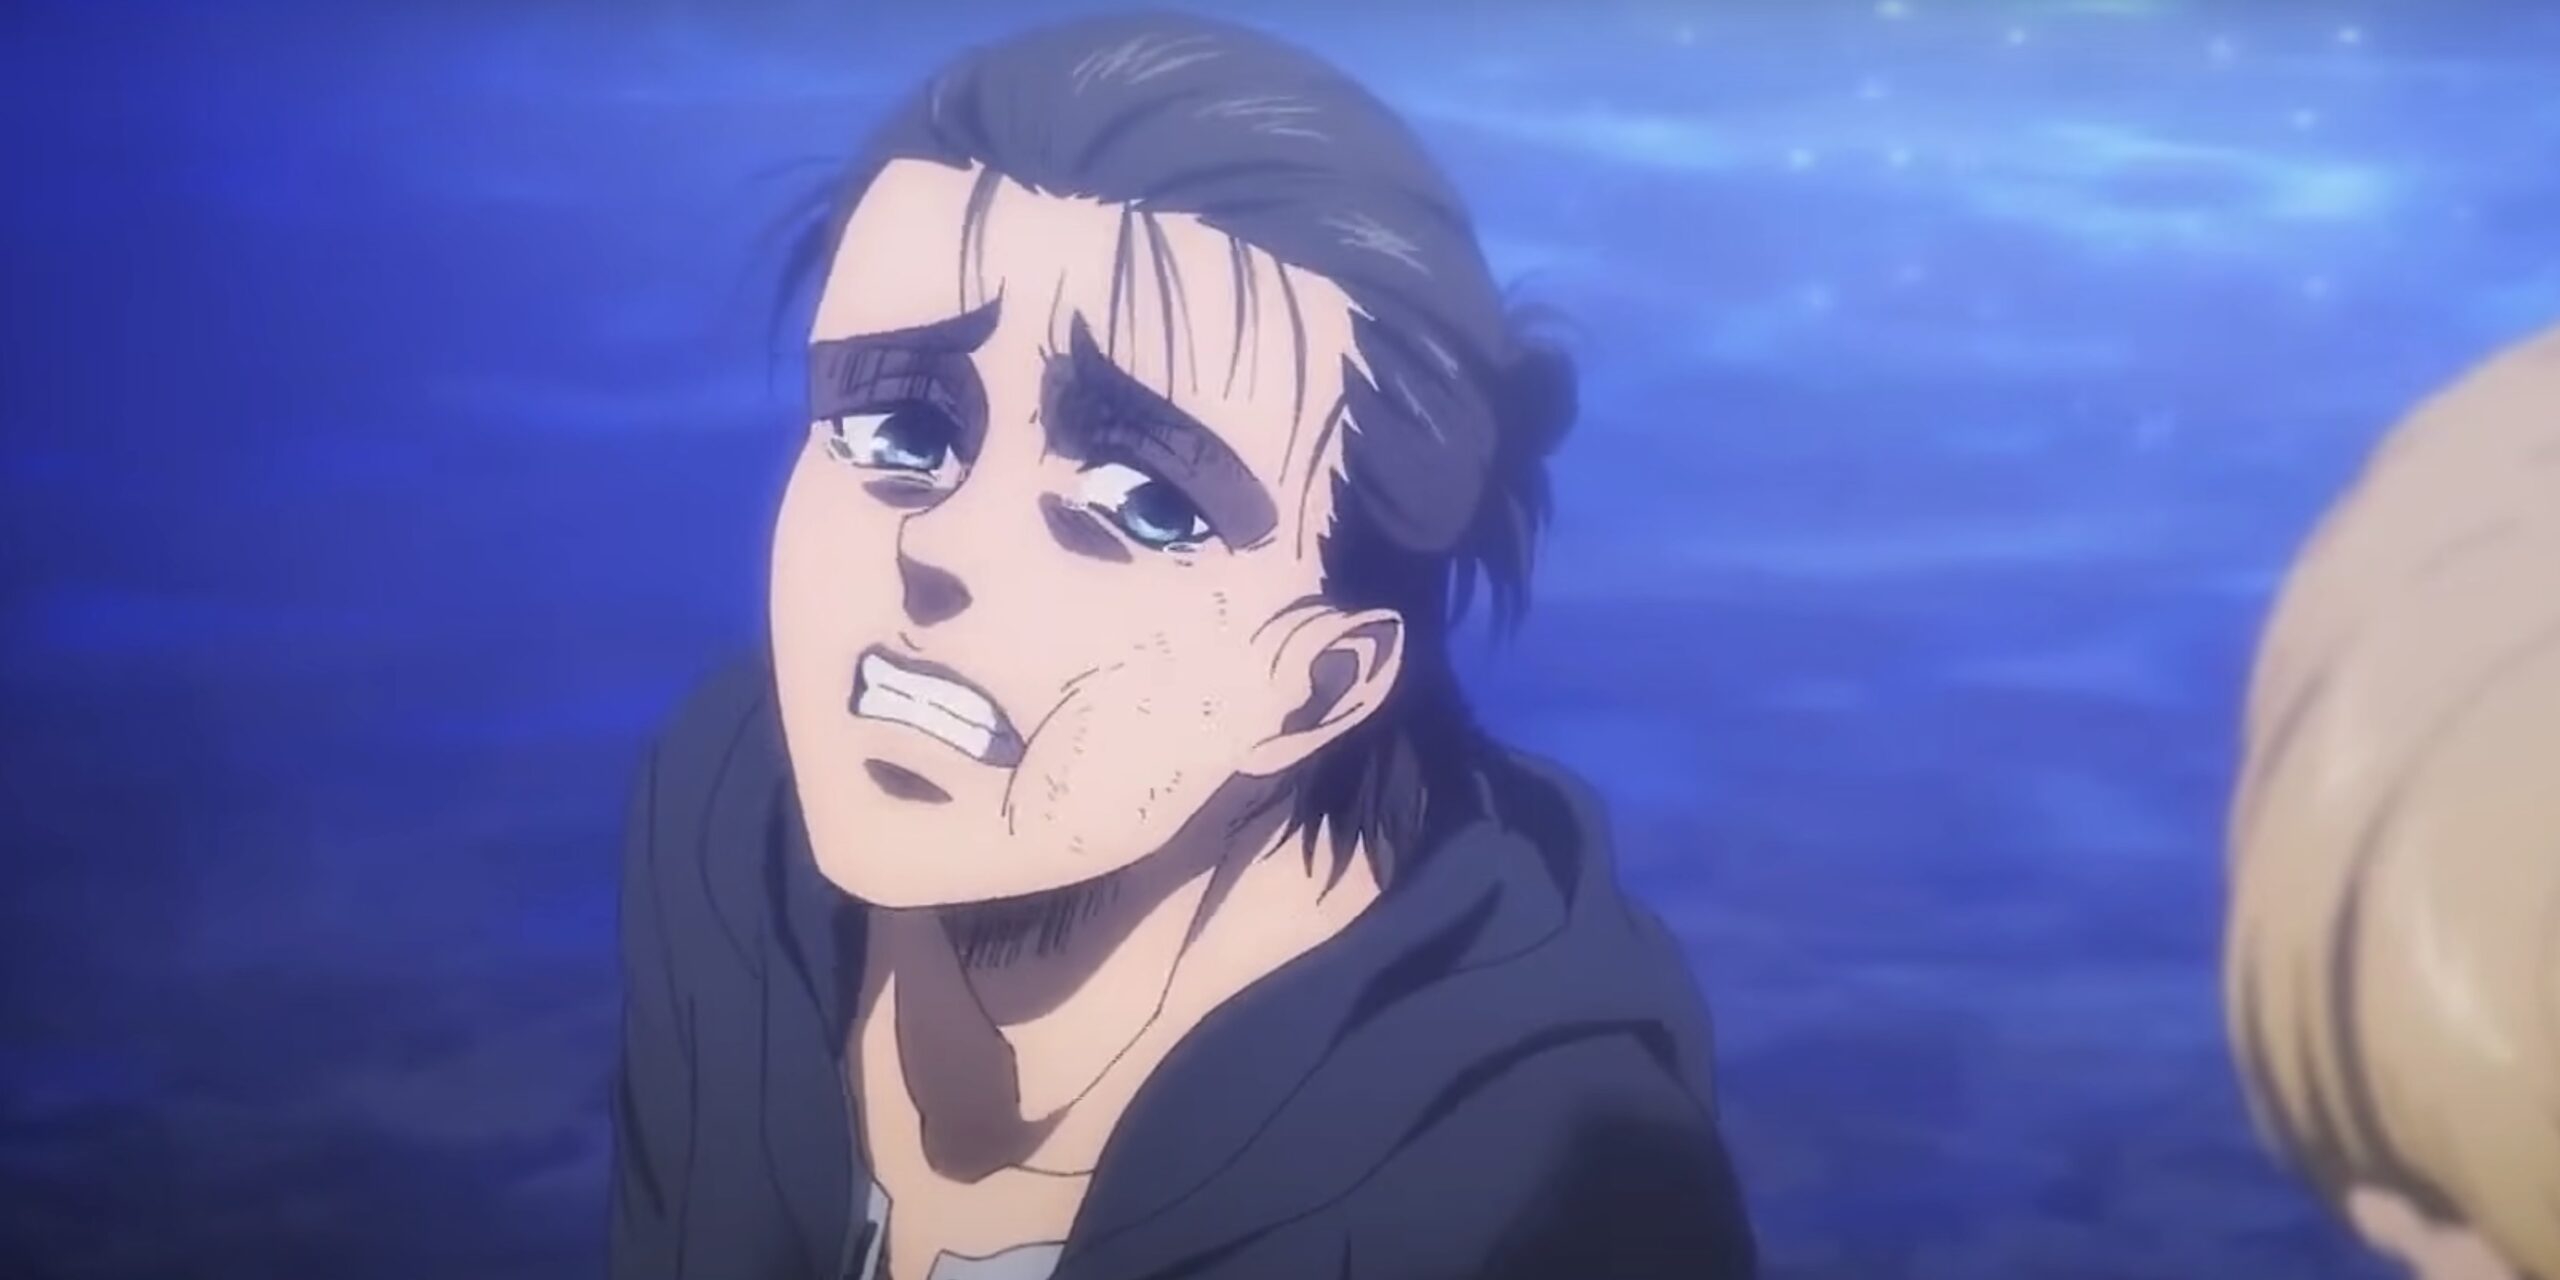 Disturbing Clue Hidden in Attack on Titan Finale That Went Unnoticed by Many